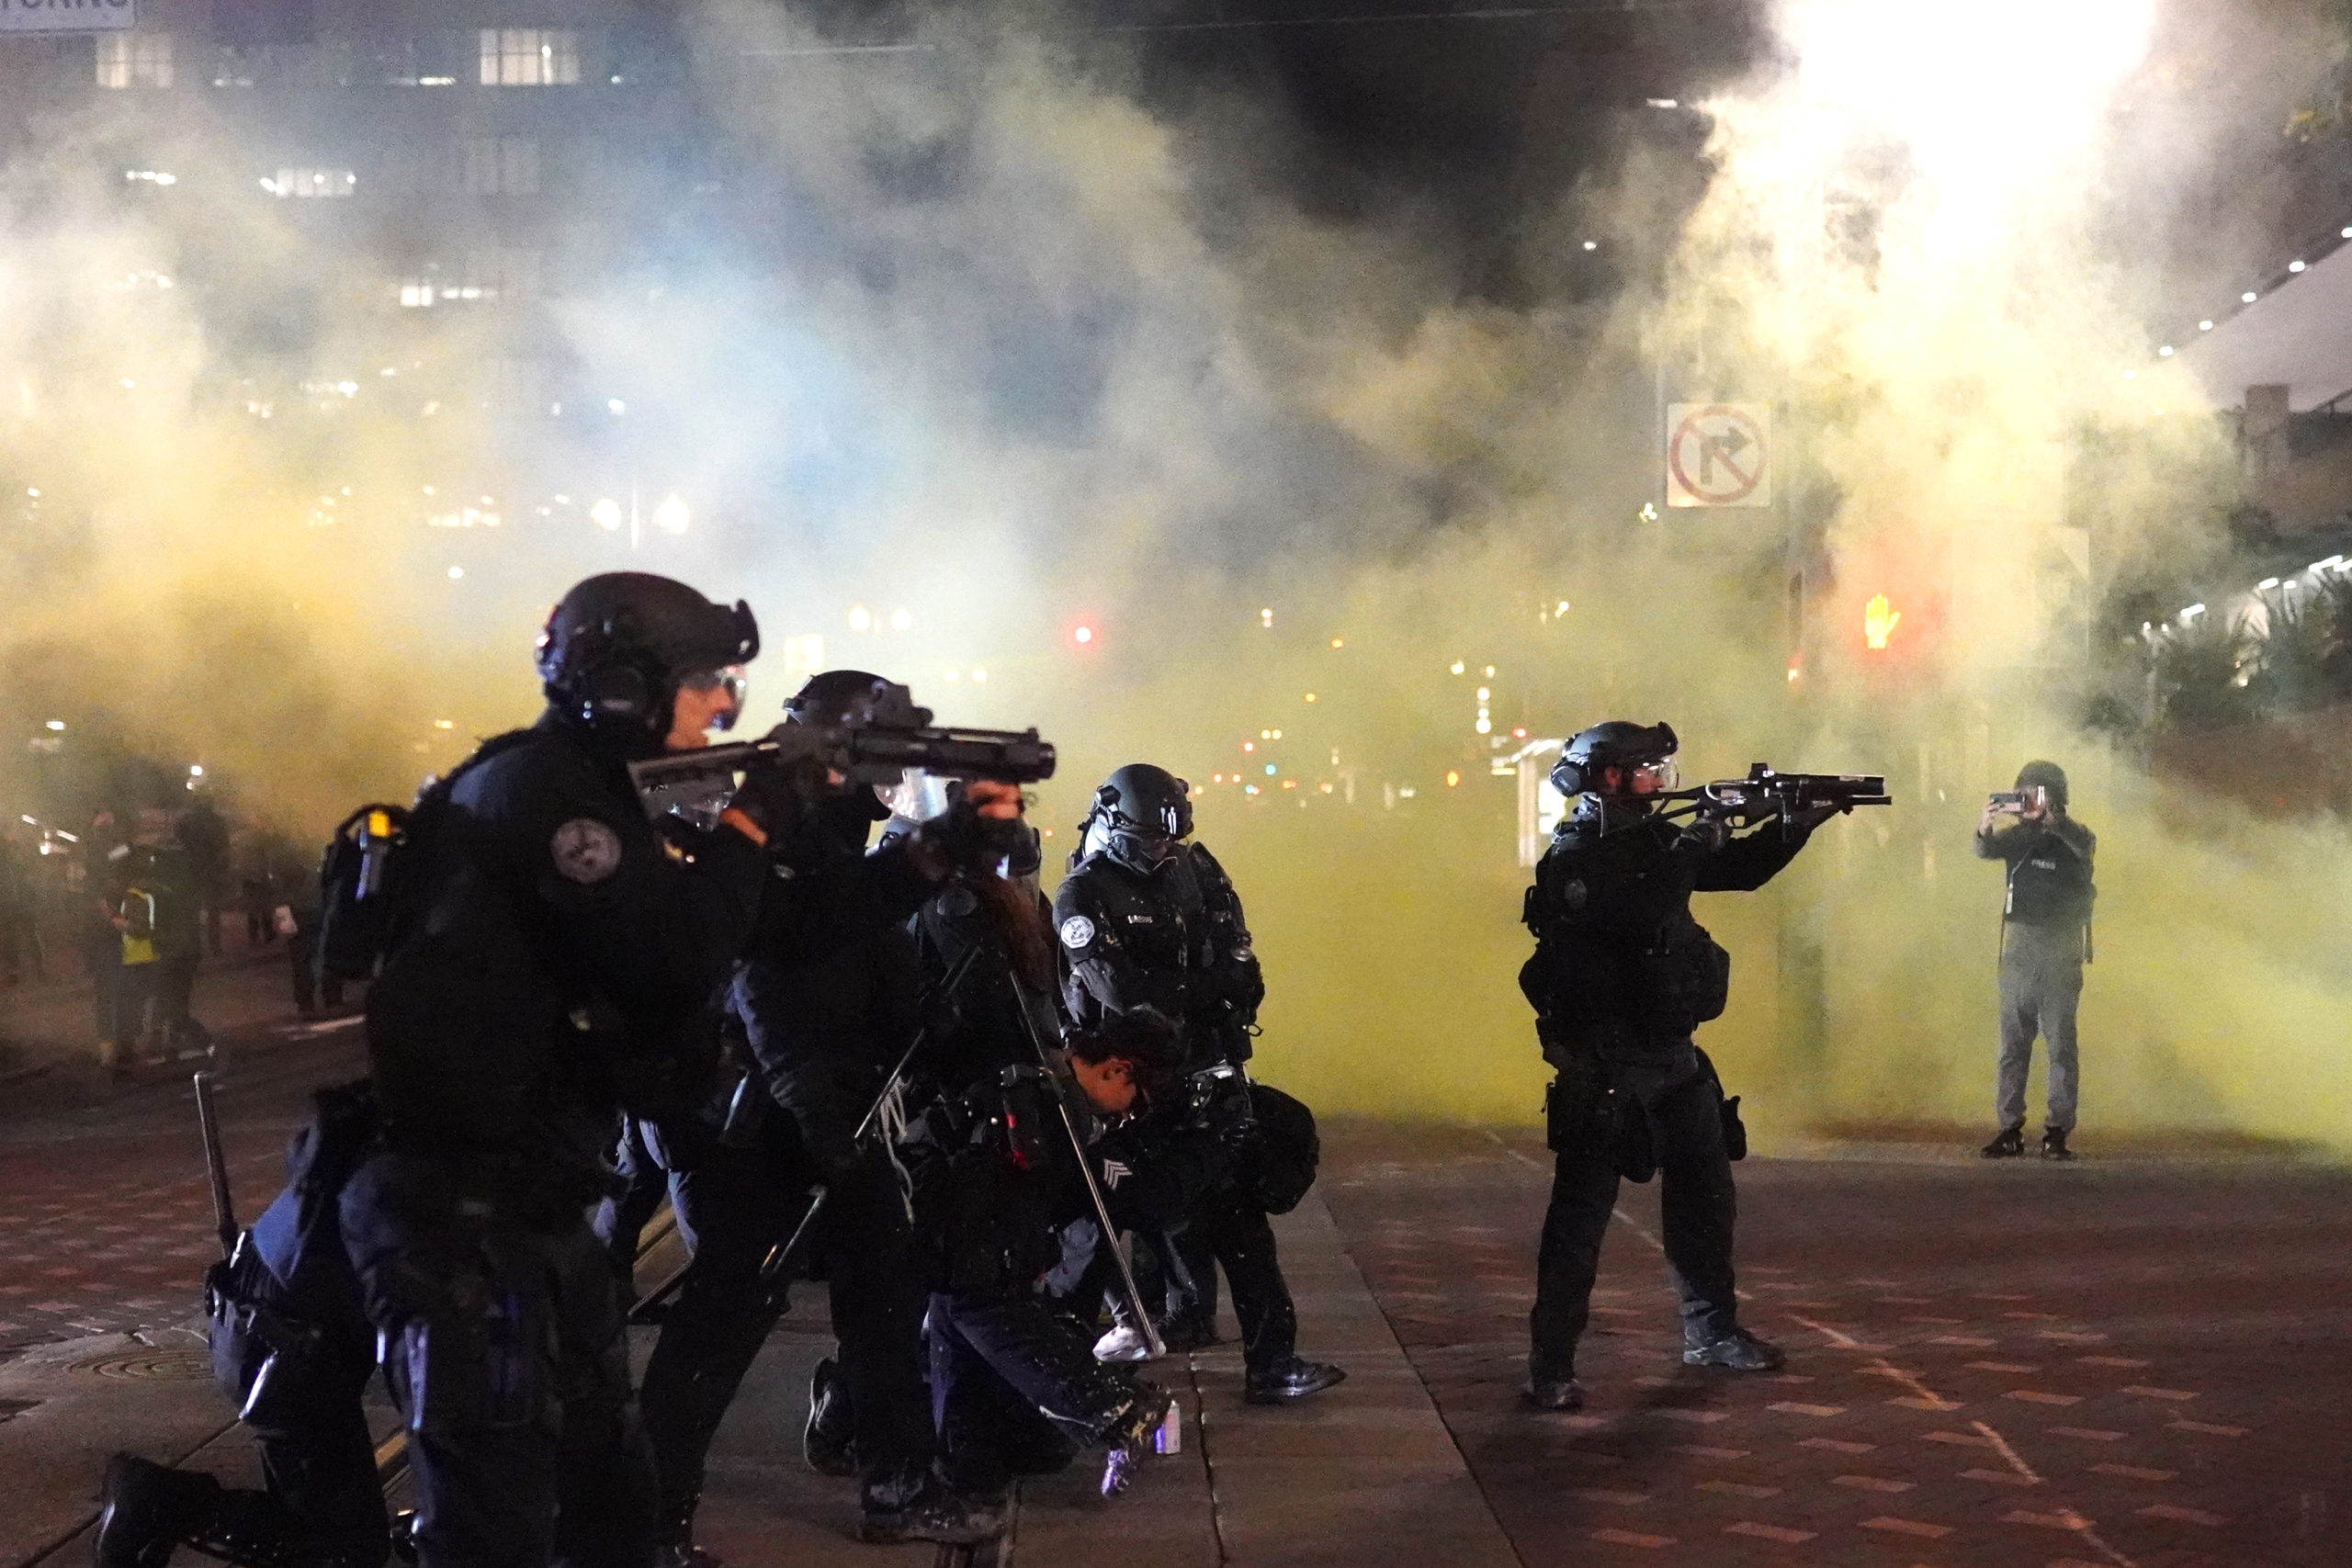 PORTLAND, OR - AUGUST 25: Portland police officers fires less lethal rounds through smoke while dispersing a crowd of about 150 people from Portland City Hall on August 25, 2020 in Portland, Oregon. Crowds chanted in support of Kenosha Wisconsin on the 90th night of protests Tuesday, where demonstrations have continued for days following the police shooting of Jacob Blake. (Photo by Nathan Howard/Getty Images)